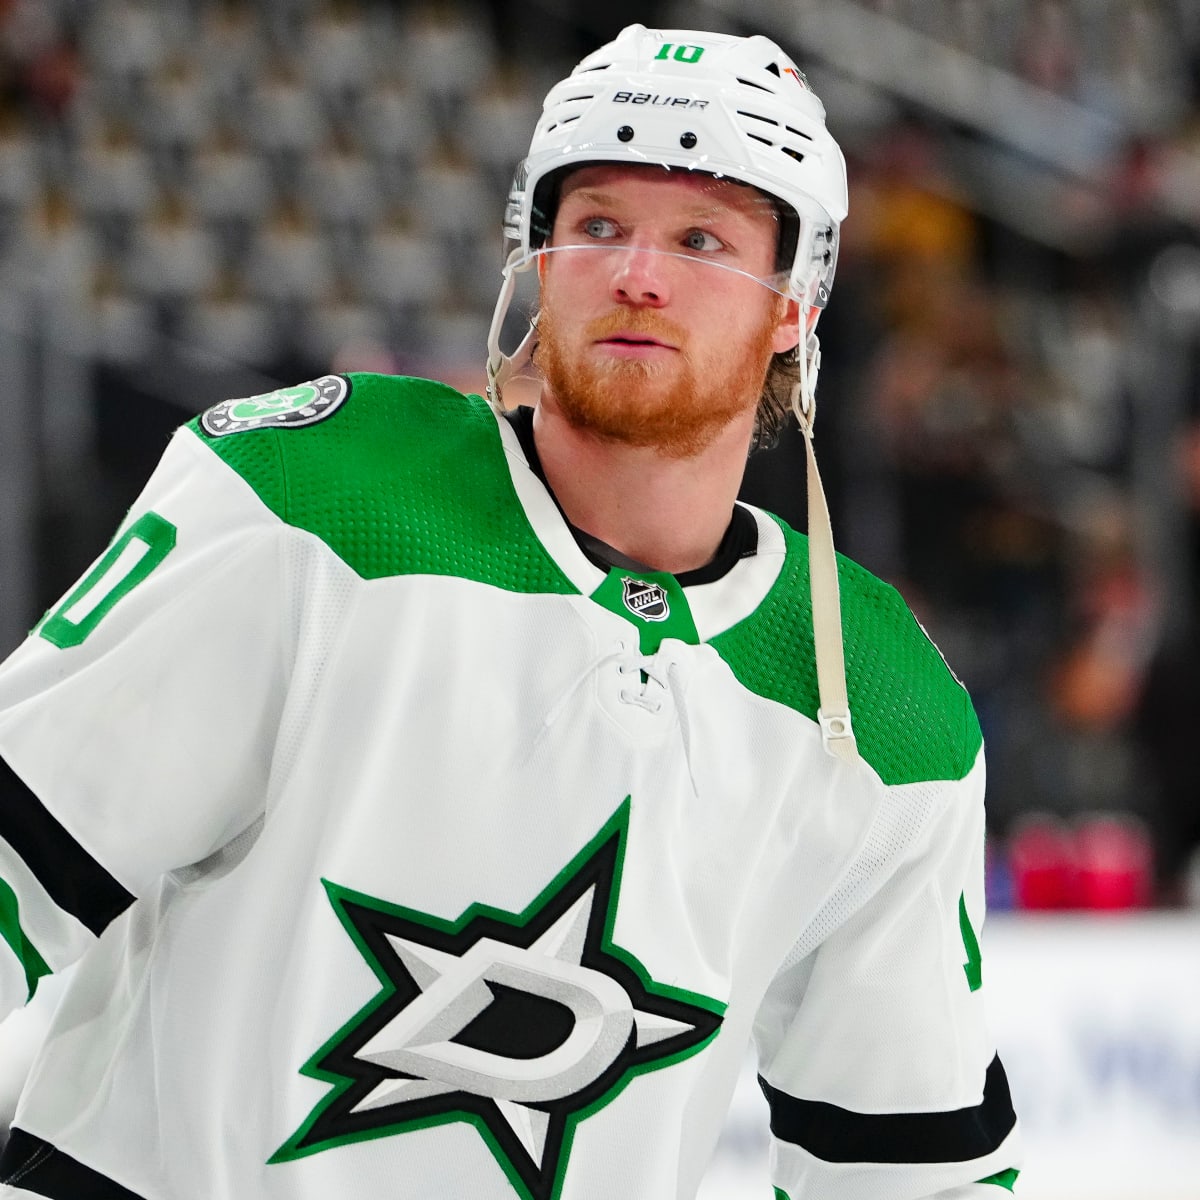 Stars prepared for first preseason matchup against Coyotes